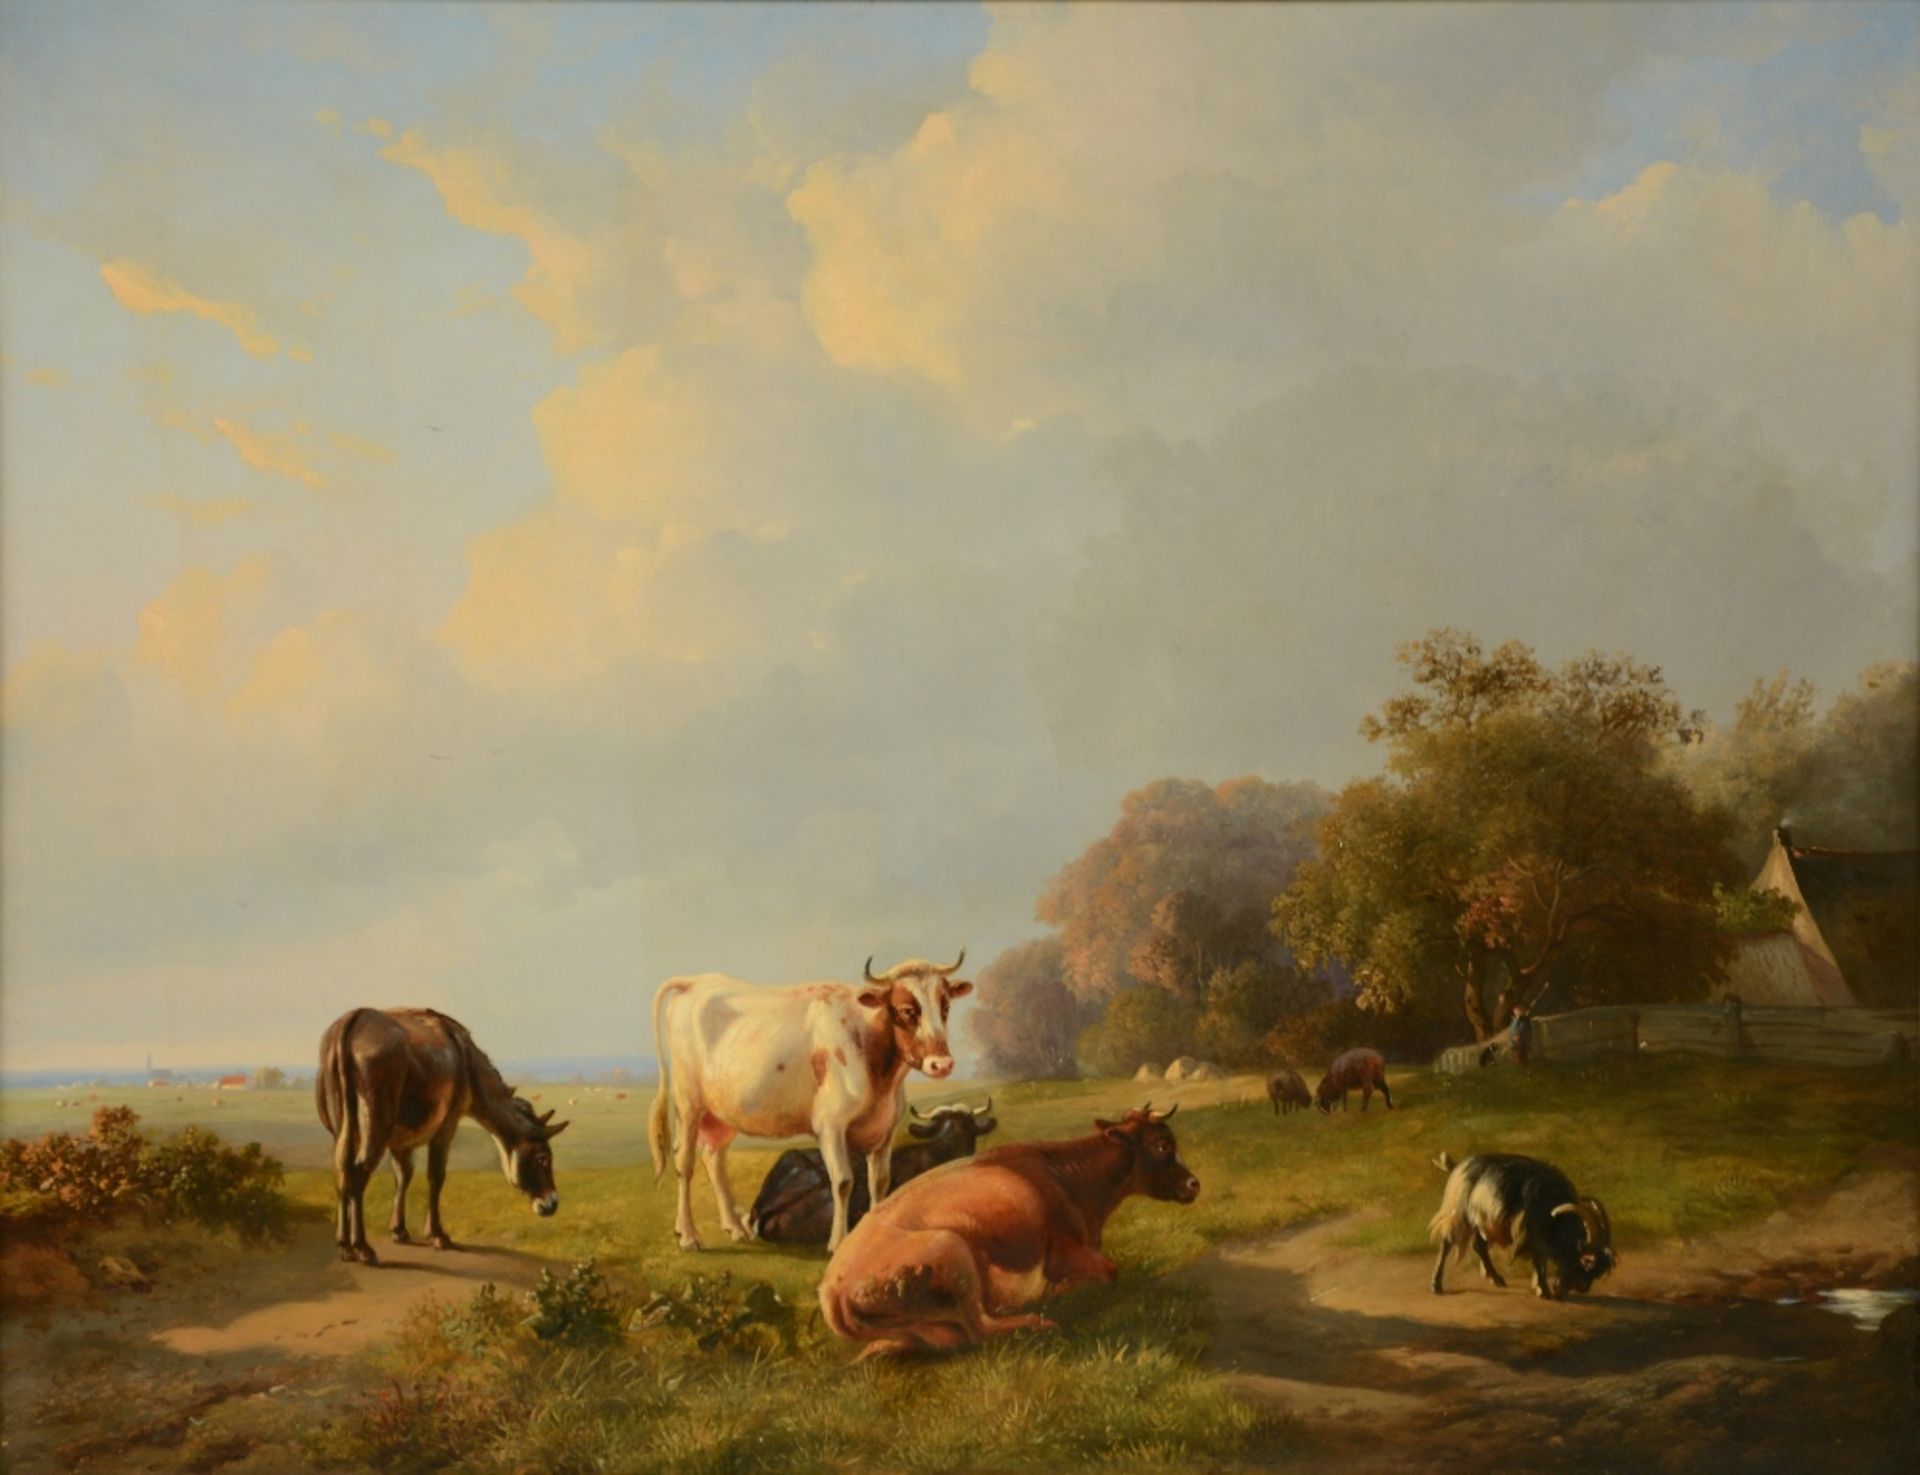 L. P. Verwée / Eugène Verboeckhoven, cattle, a goat and a donkey in a landscape, oil on panel, 49